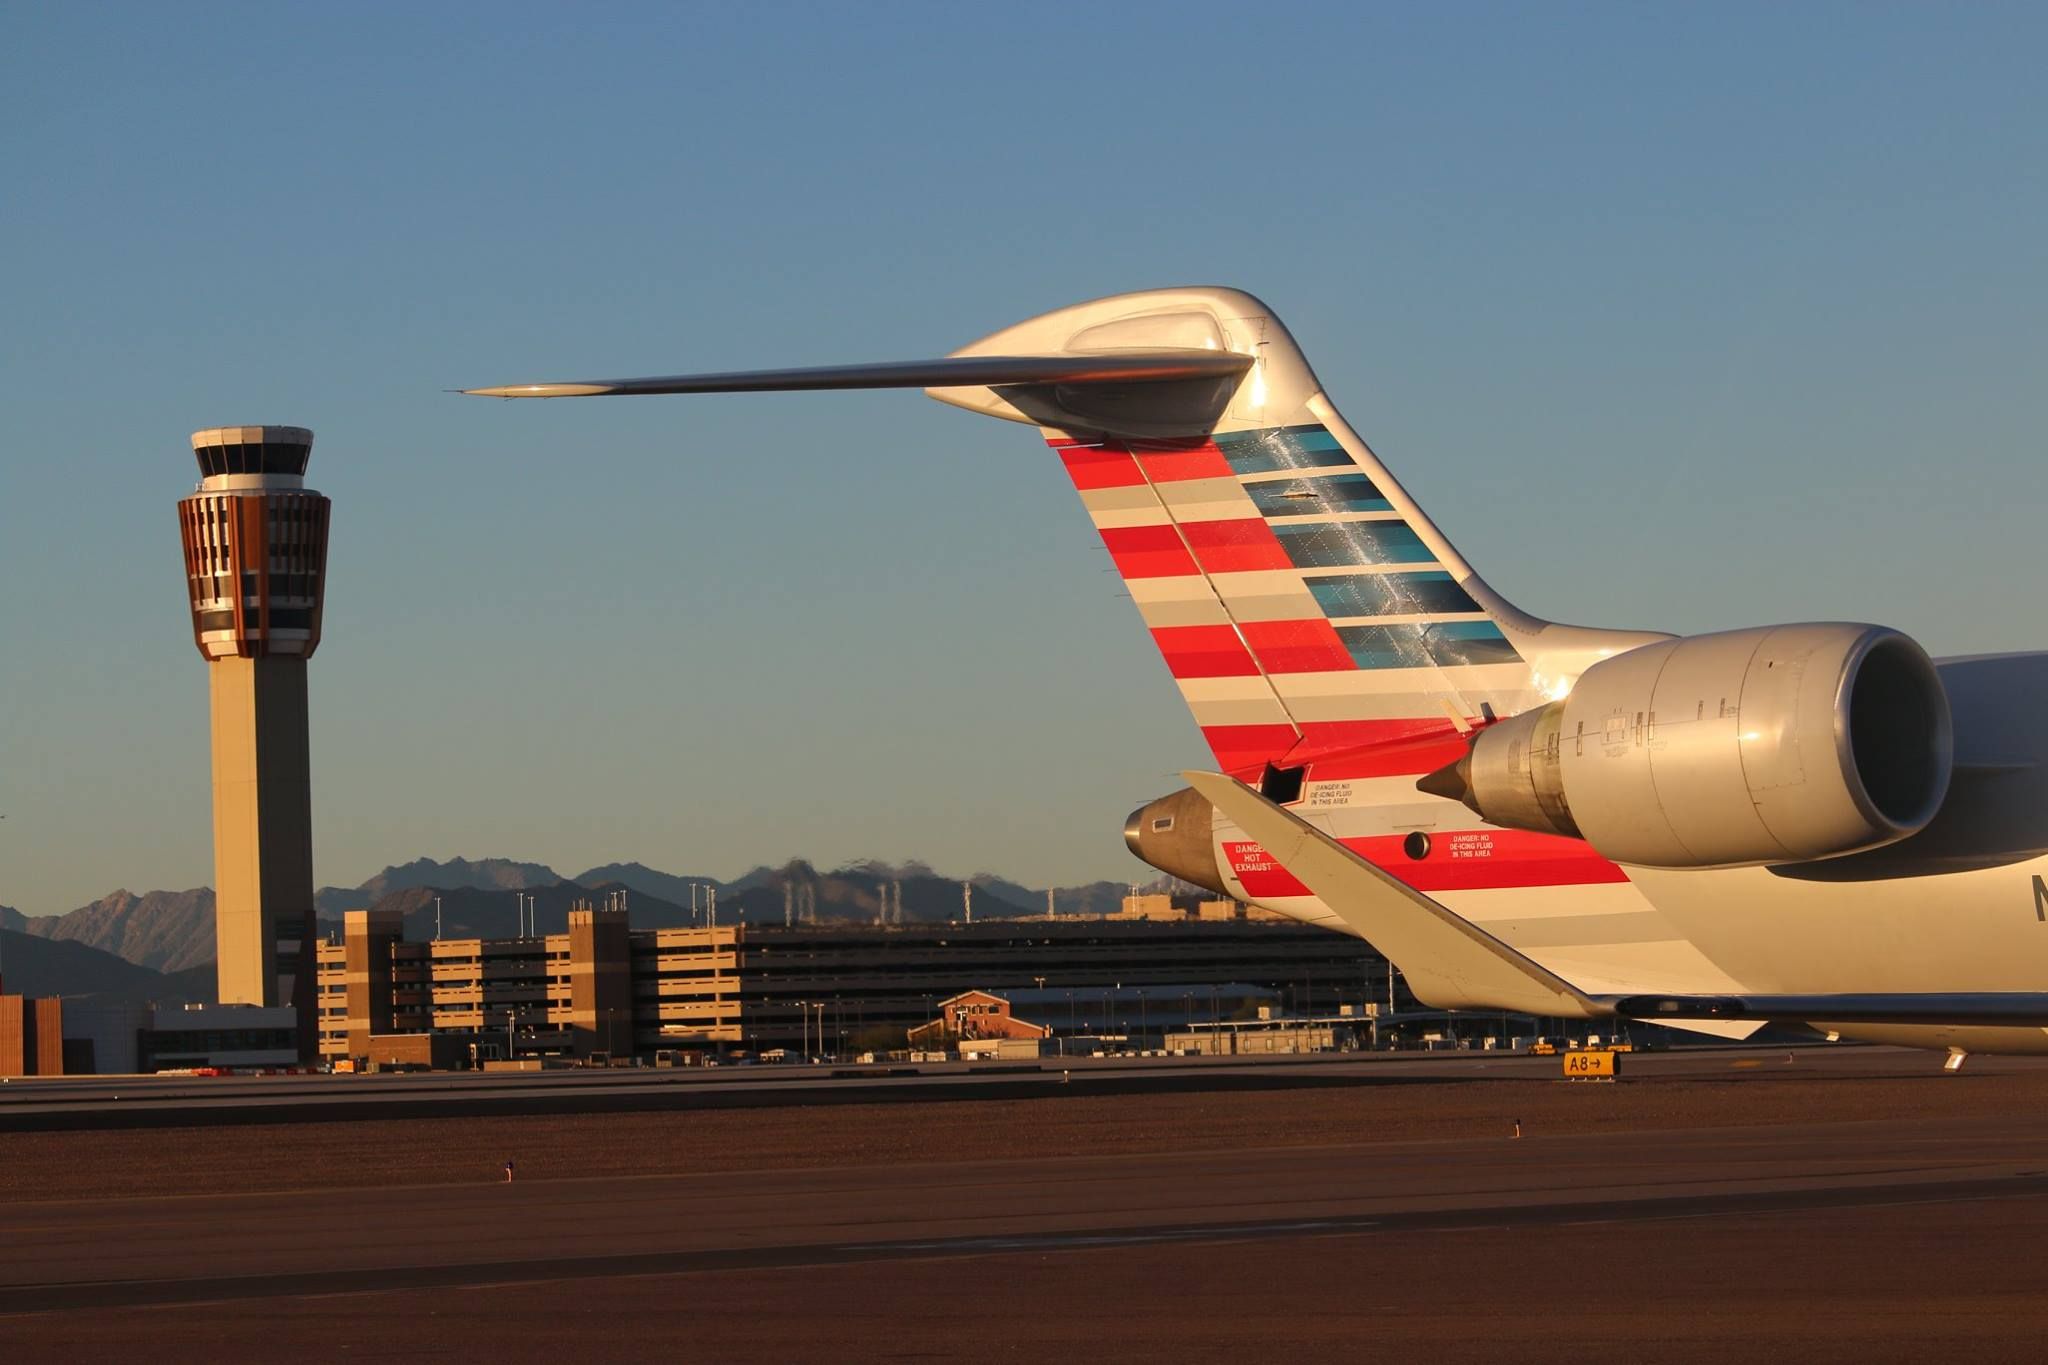 Tail of an American Eagle (operated by Mesa Airlines) CRJ-900 at Phoenix Sky Harbor International Airport